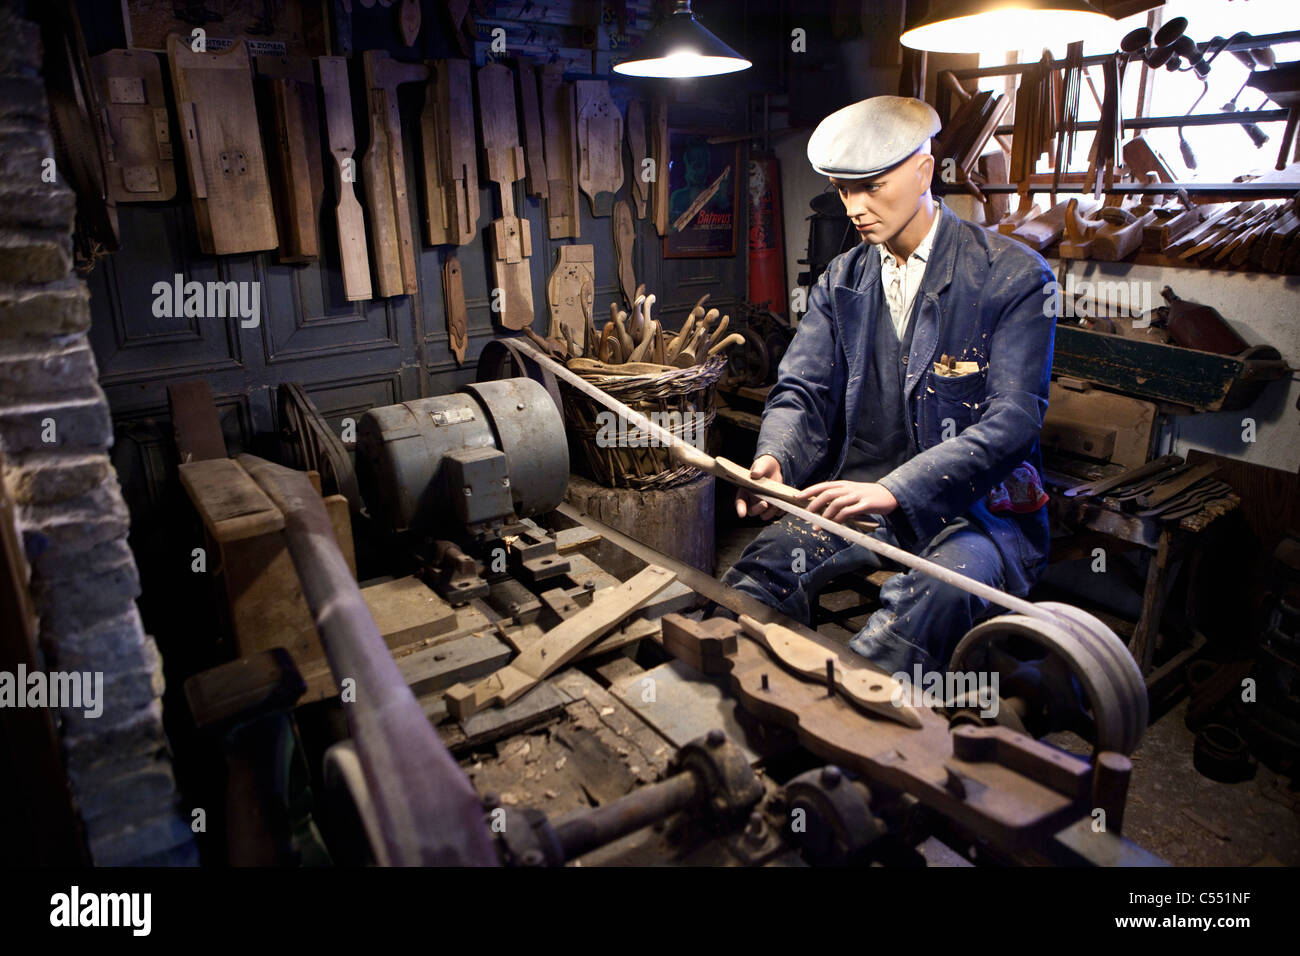 The Netherlands, Hindeloopen, Dutch capital of ice skating culture. Skate Museum. Showing traditional way of sharpening skates. Stock Photo